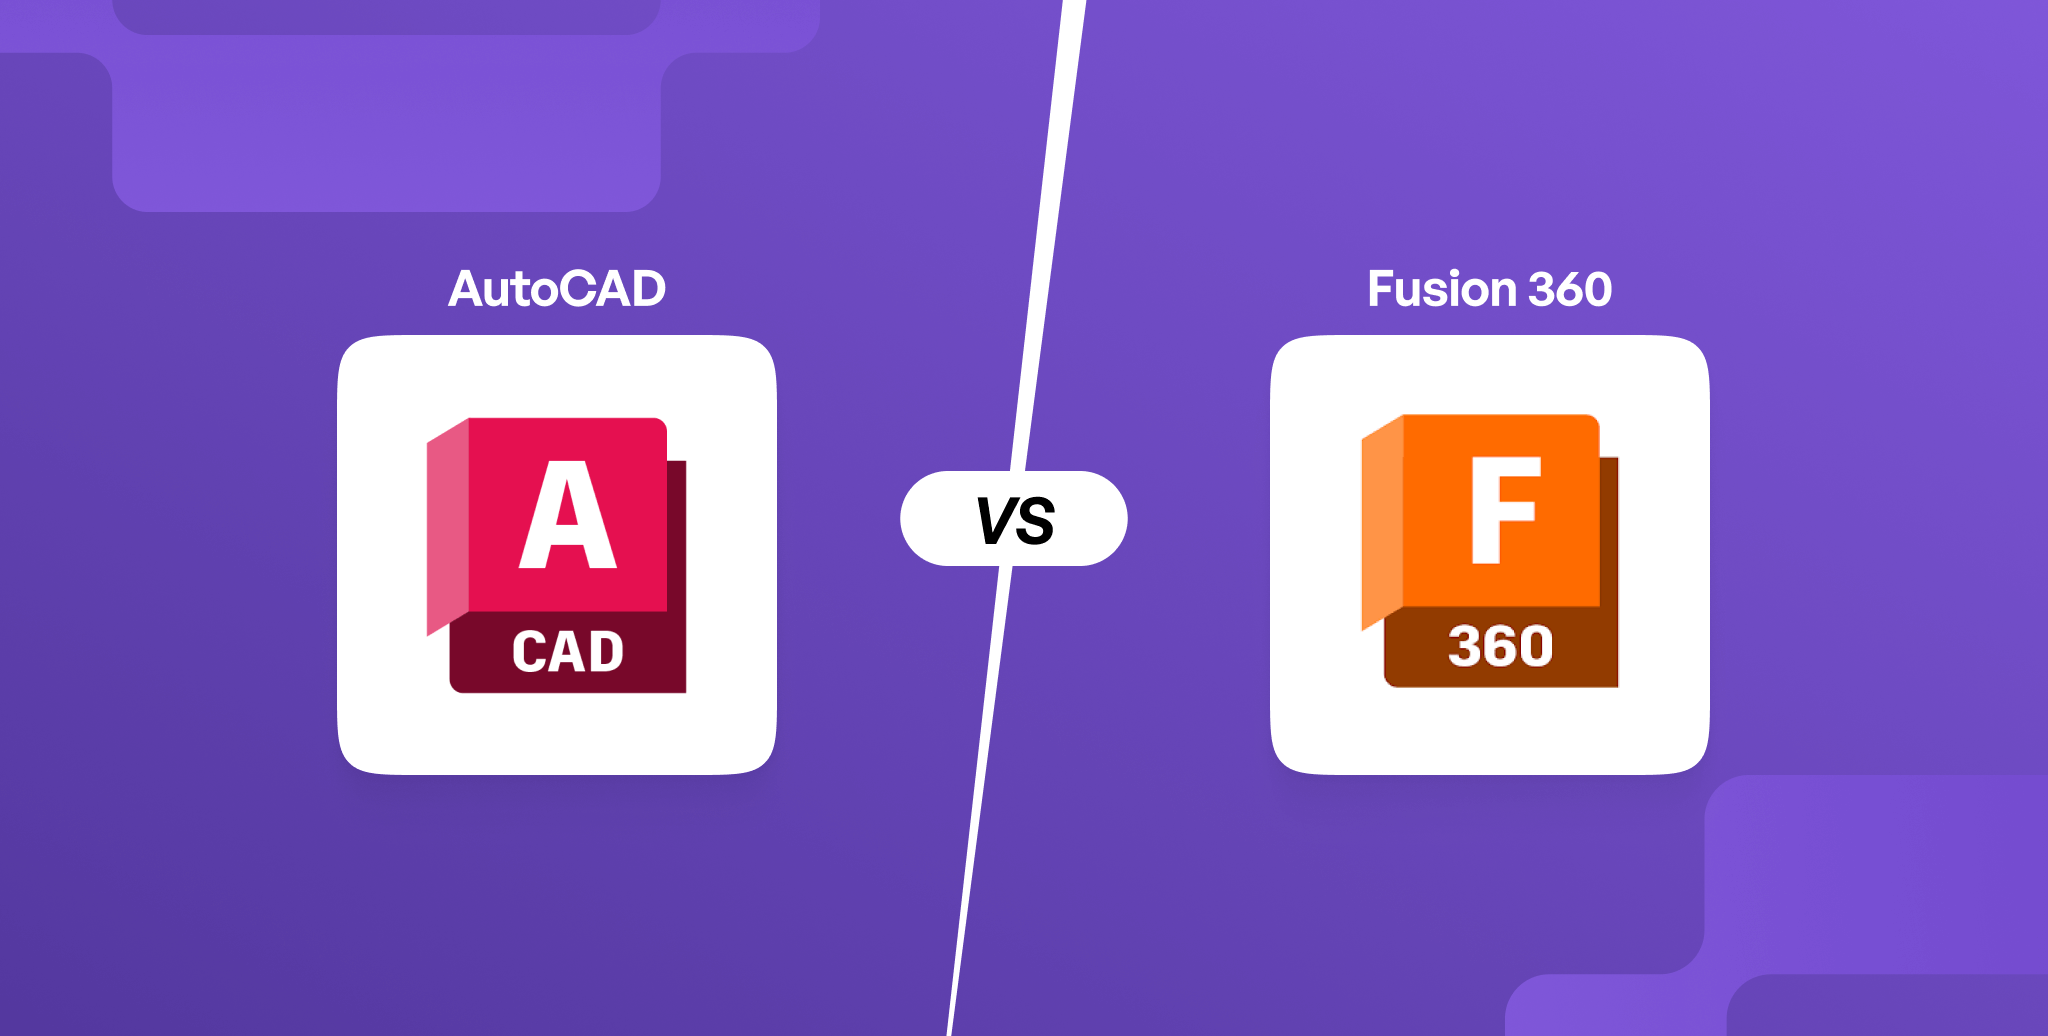 Eve ledsager Kejserlig AutoCAD v/s Fusion 360: Which Software is Best to Learn in 2022?